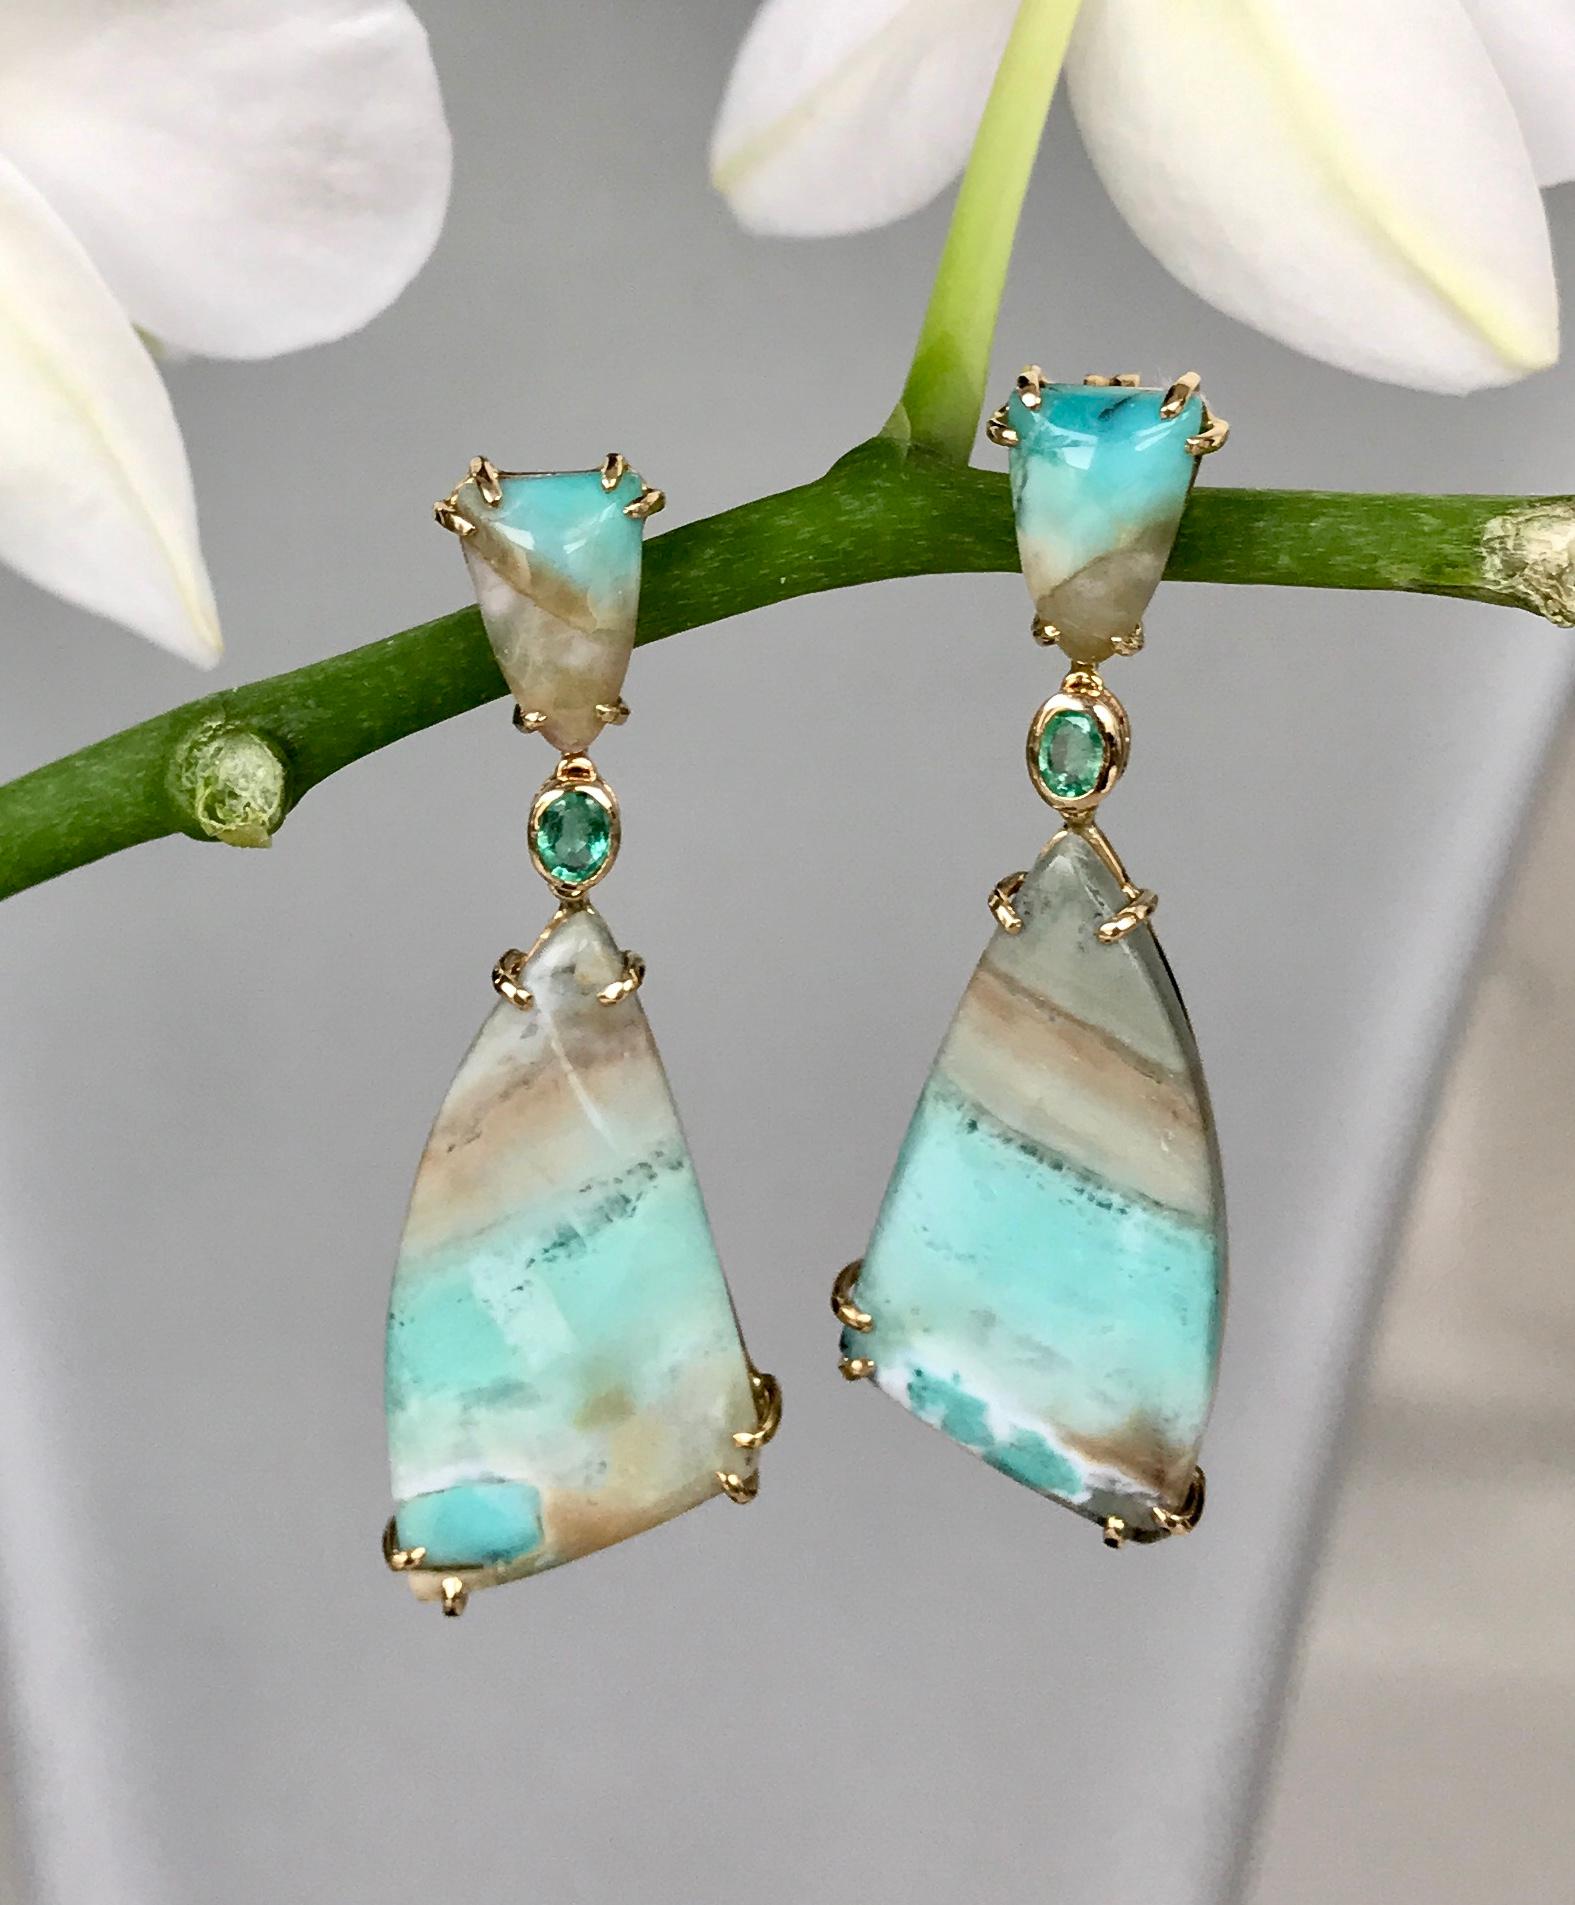 Joon Han one-of-a-kind fancy cut sail-shaped Indonesian opalized petrified wood and emerald drop dangle earrings are like an abstract brushstroke painting. Its dreamy hues evoke nature with its lush bluish greens and beiges bringing to mind the